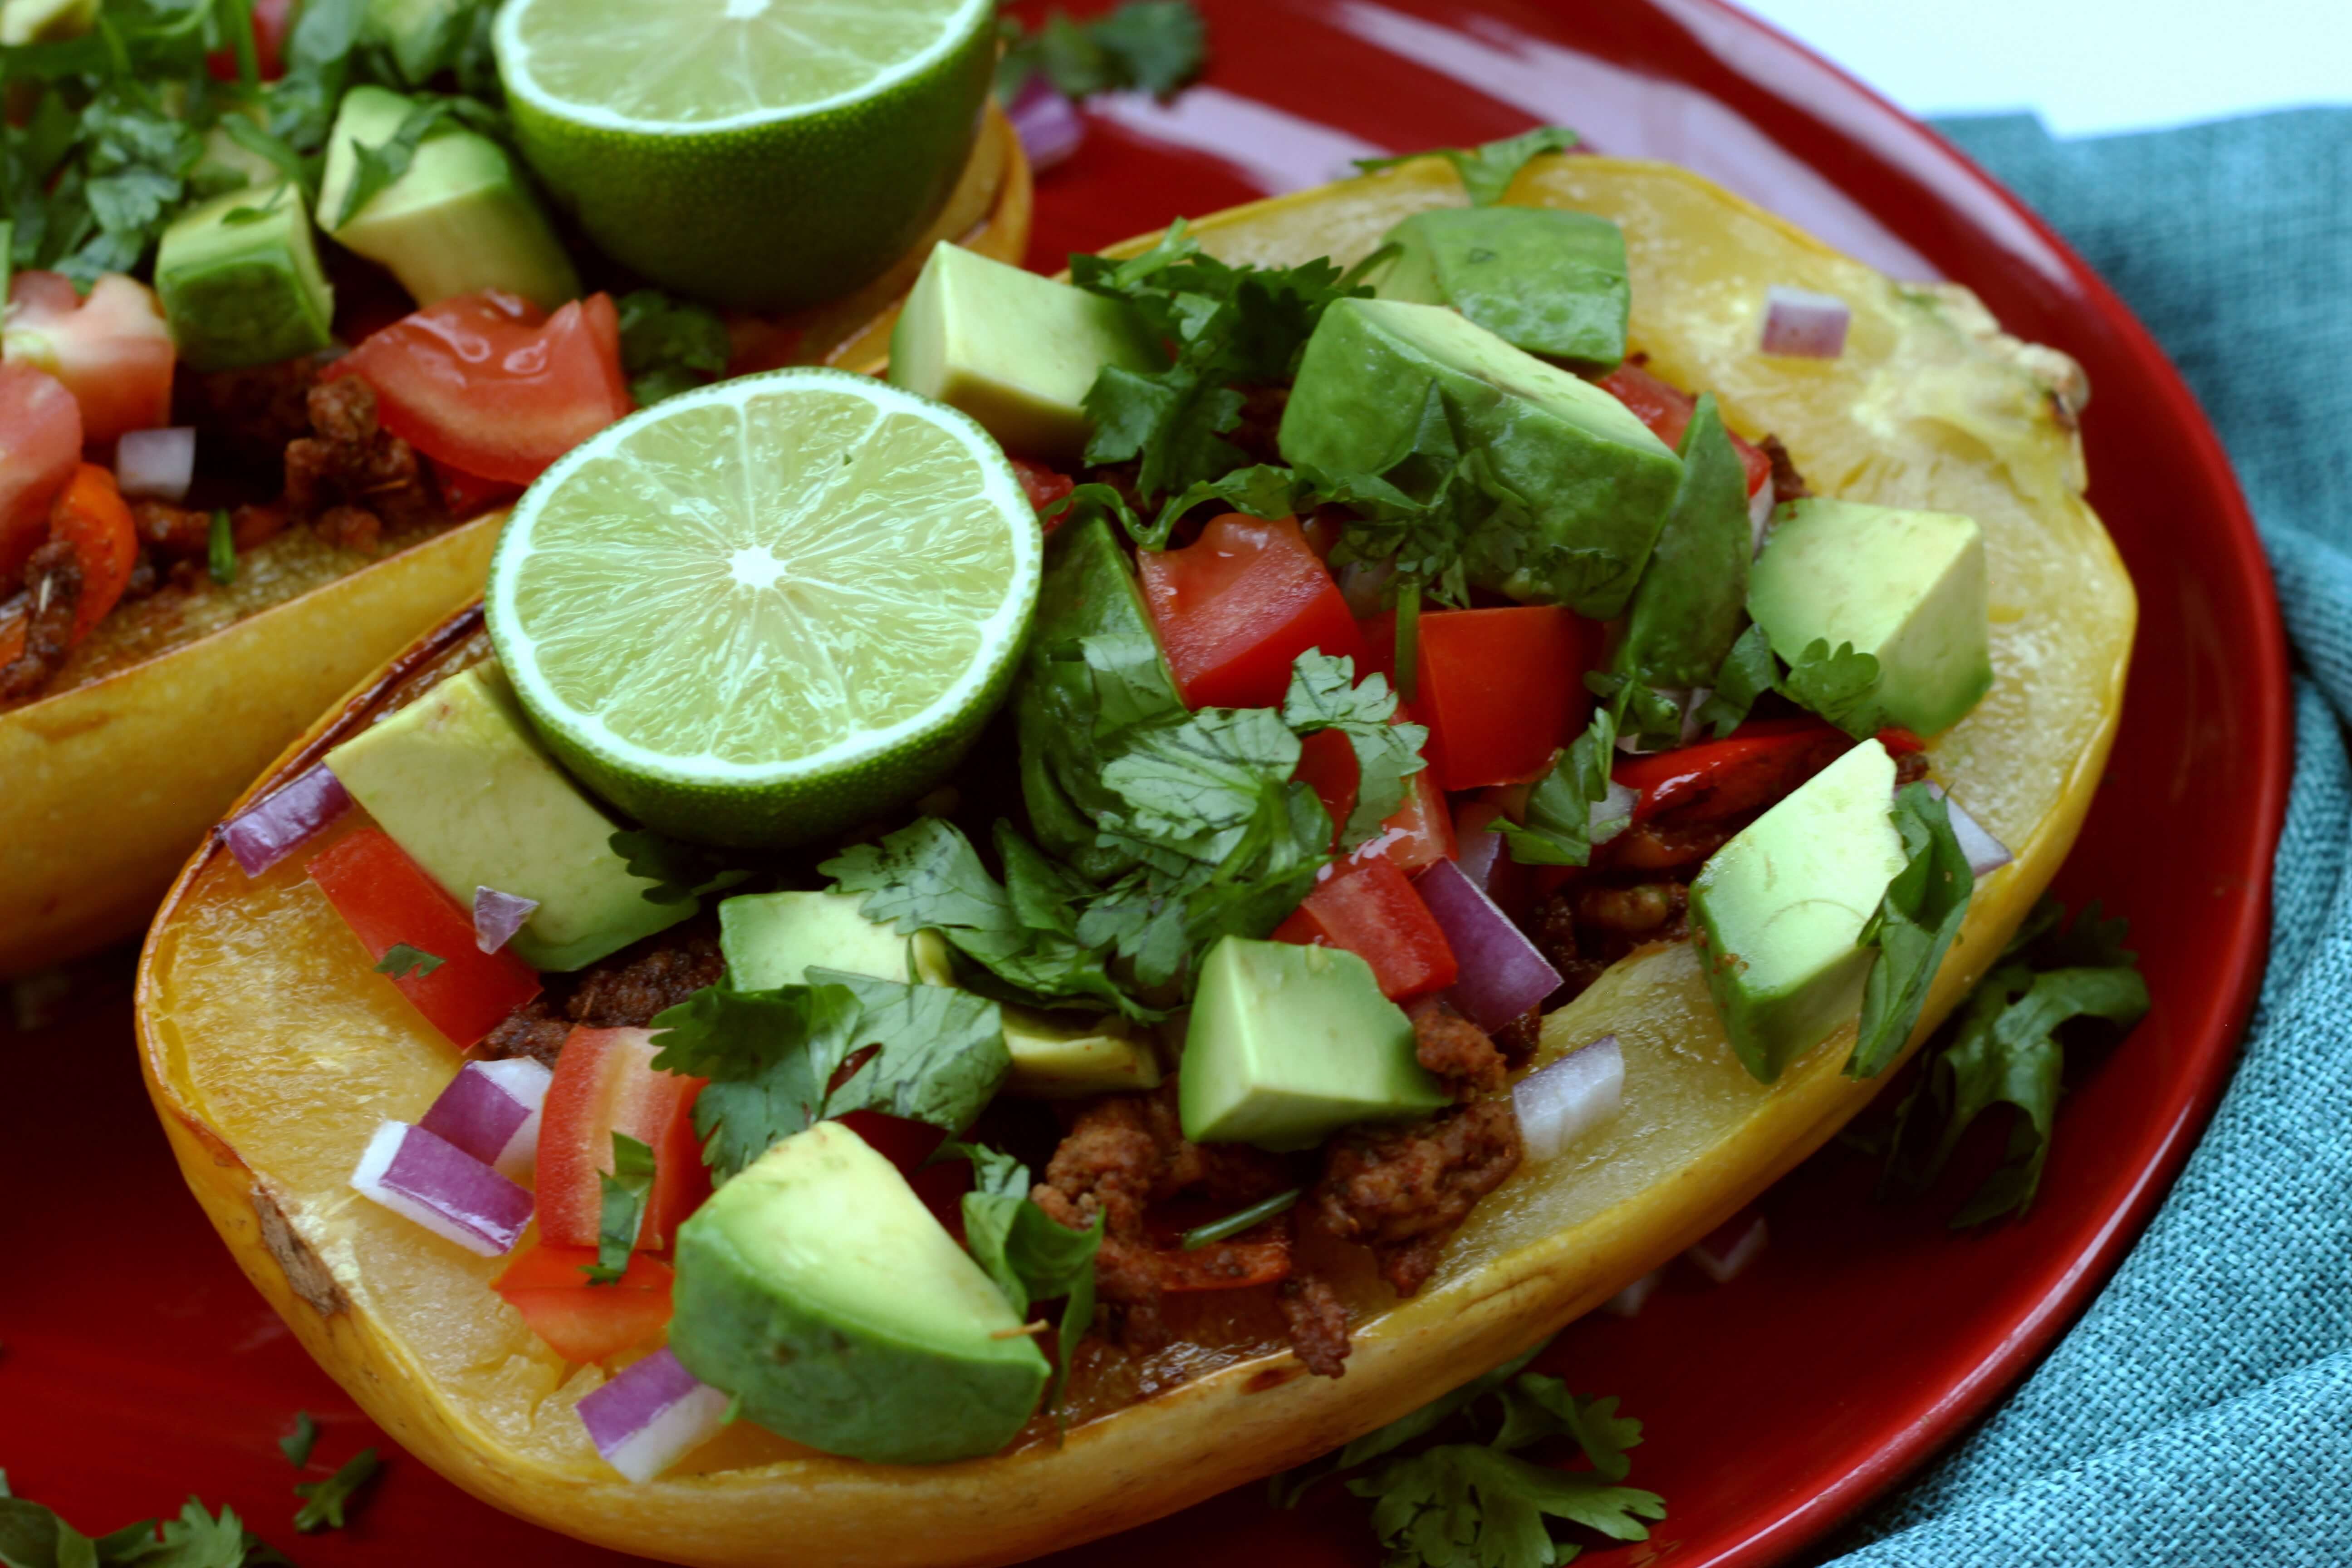 20 Meal Ideas to Help Clients with Eczema: Spaghetti Squash Burrito Bowls